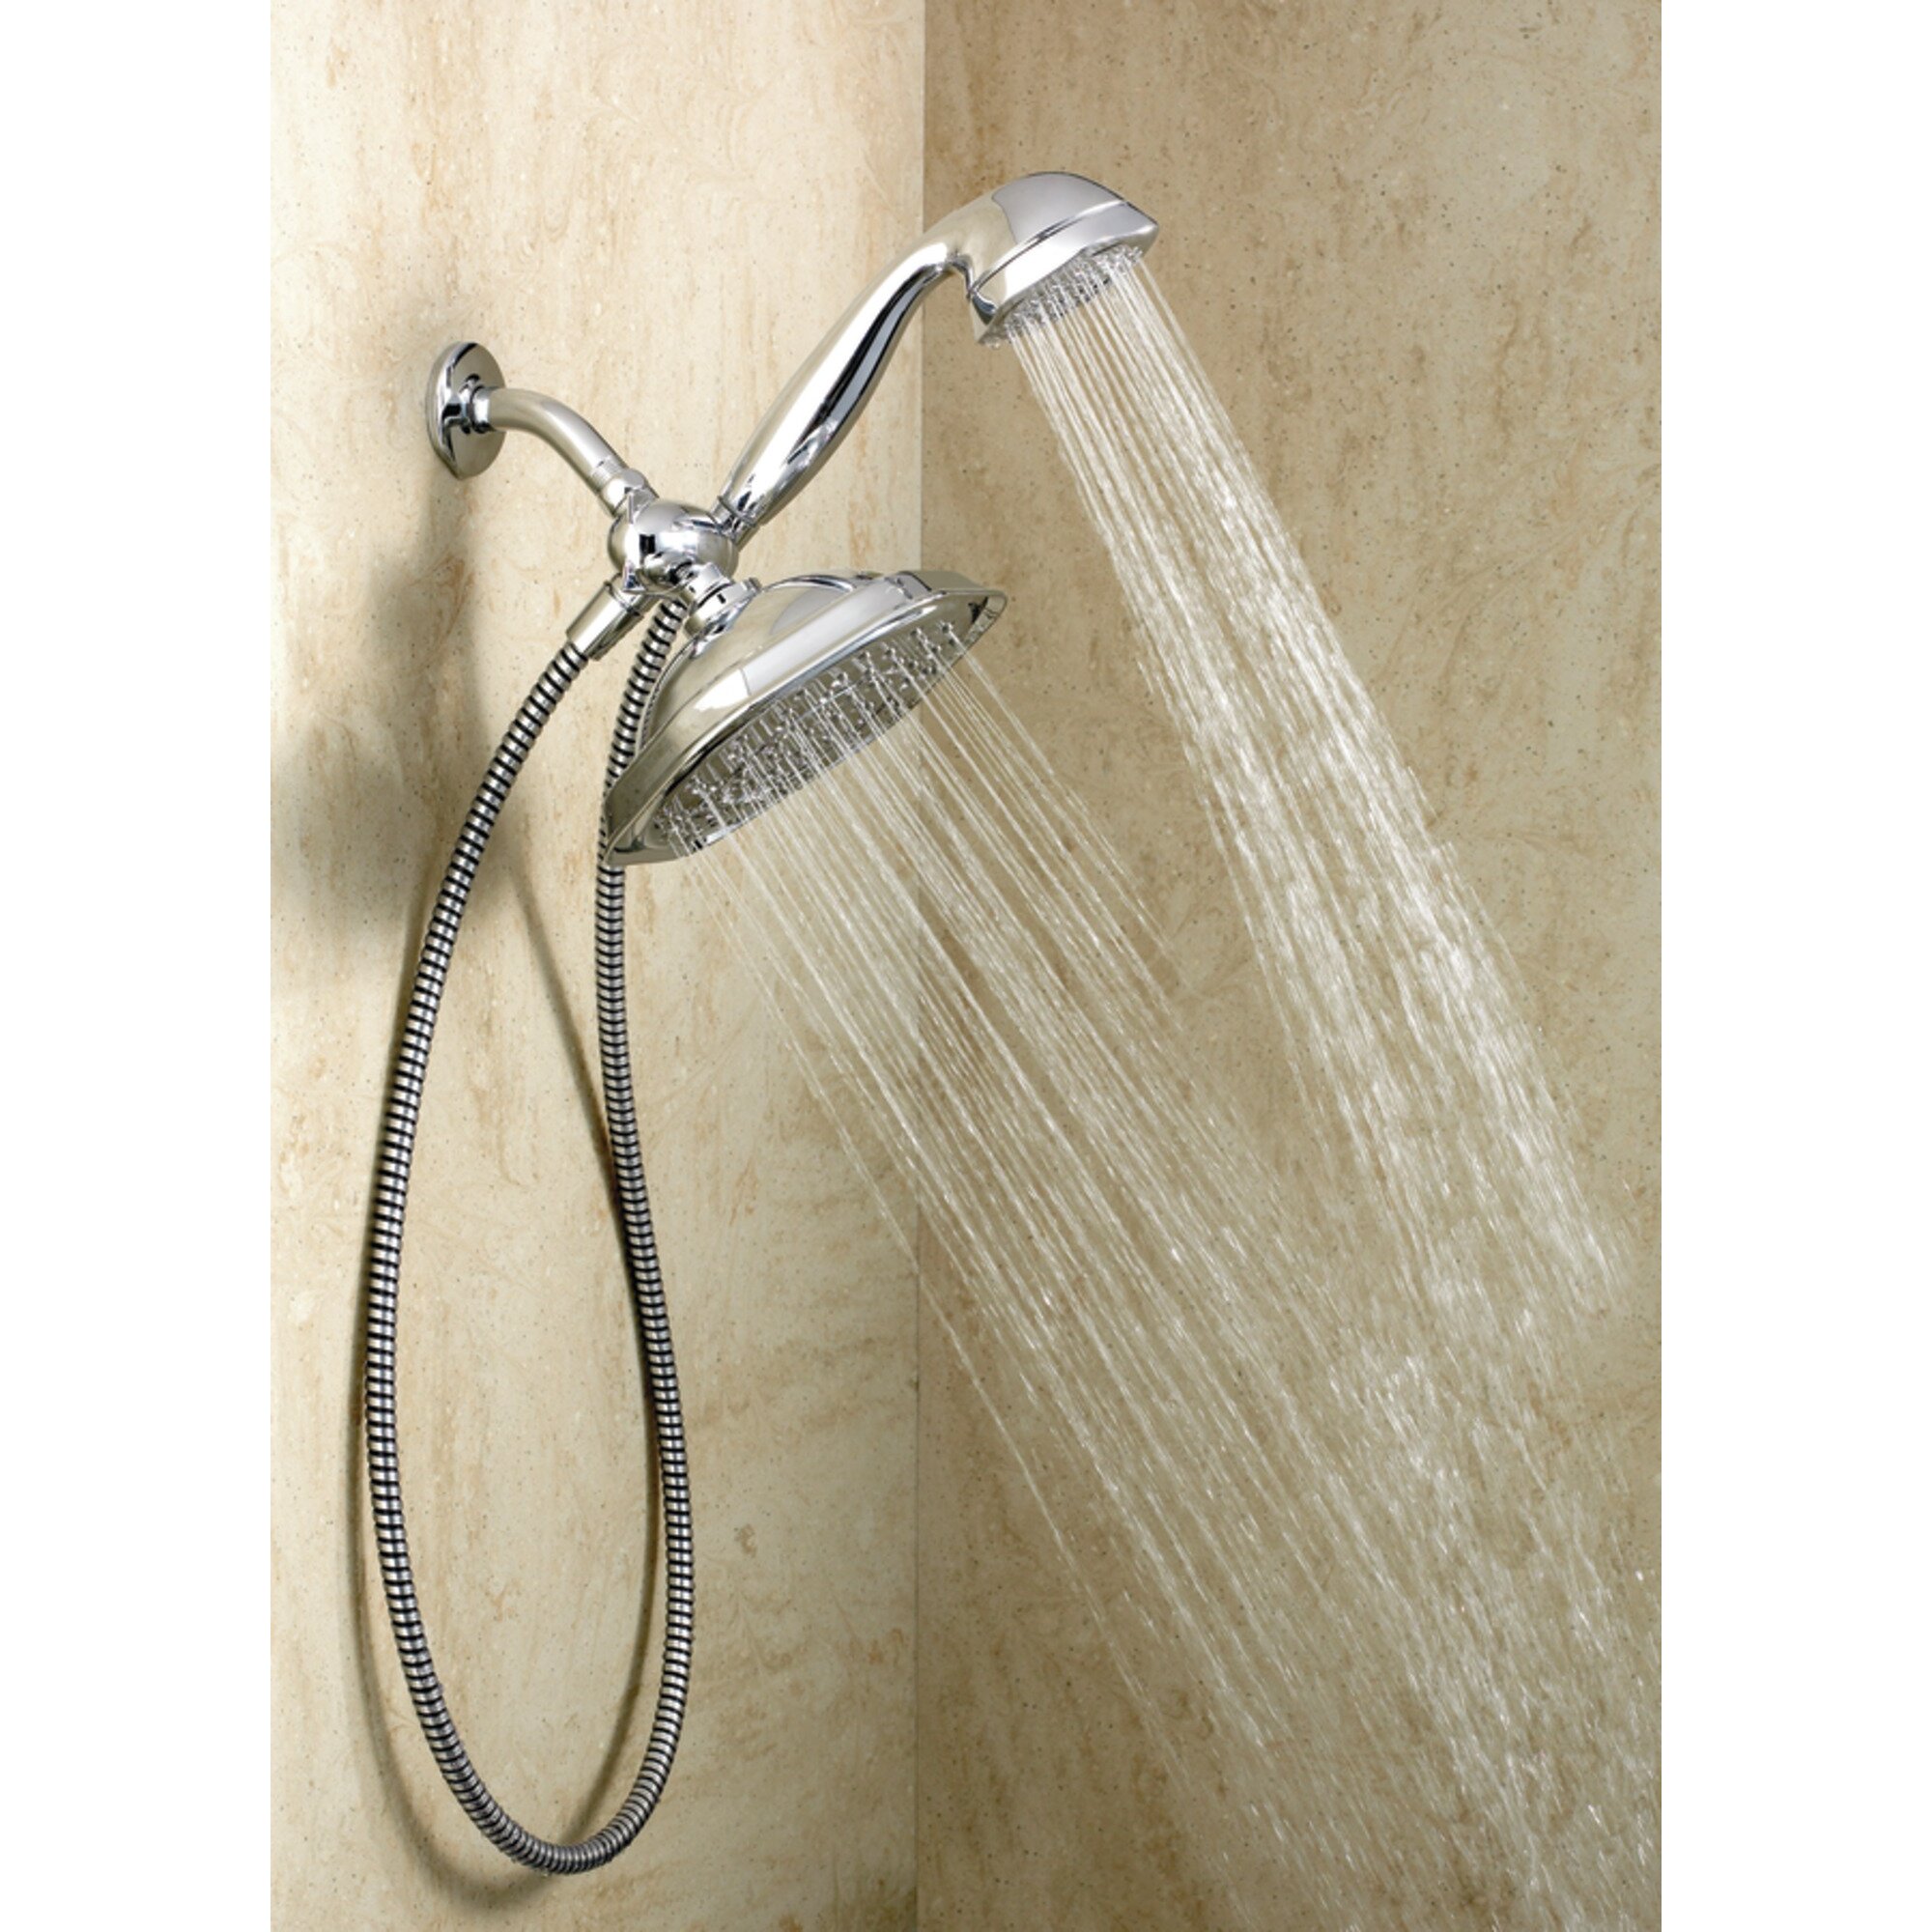 Moen Refresh Shower Head With Hand Shower Review